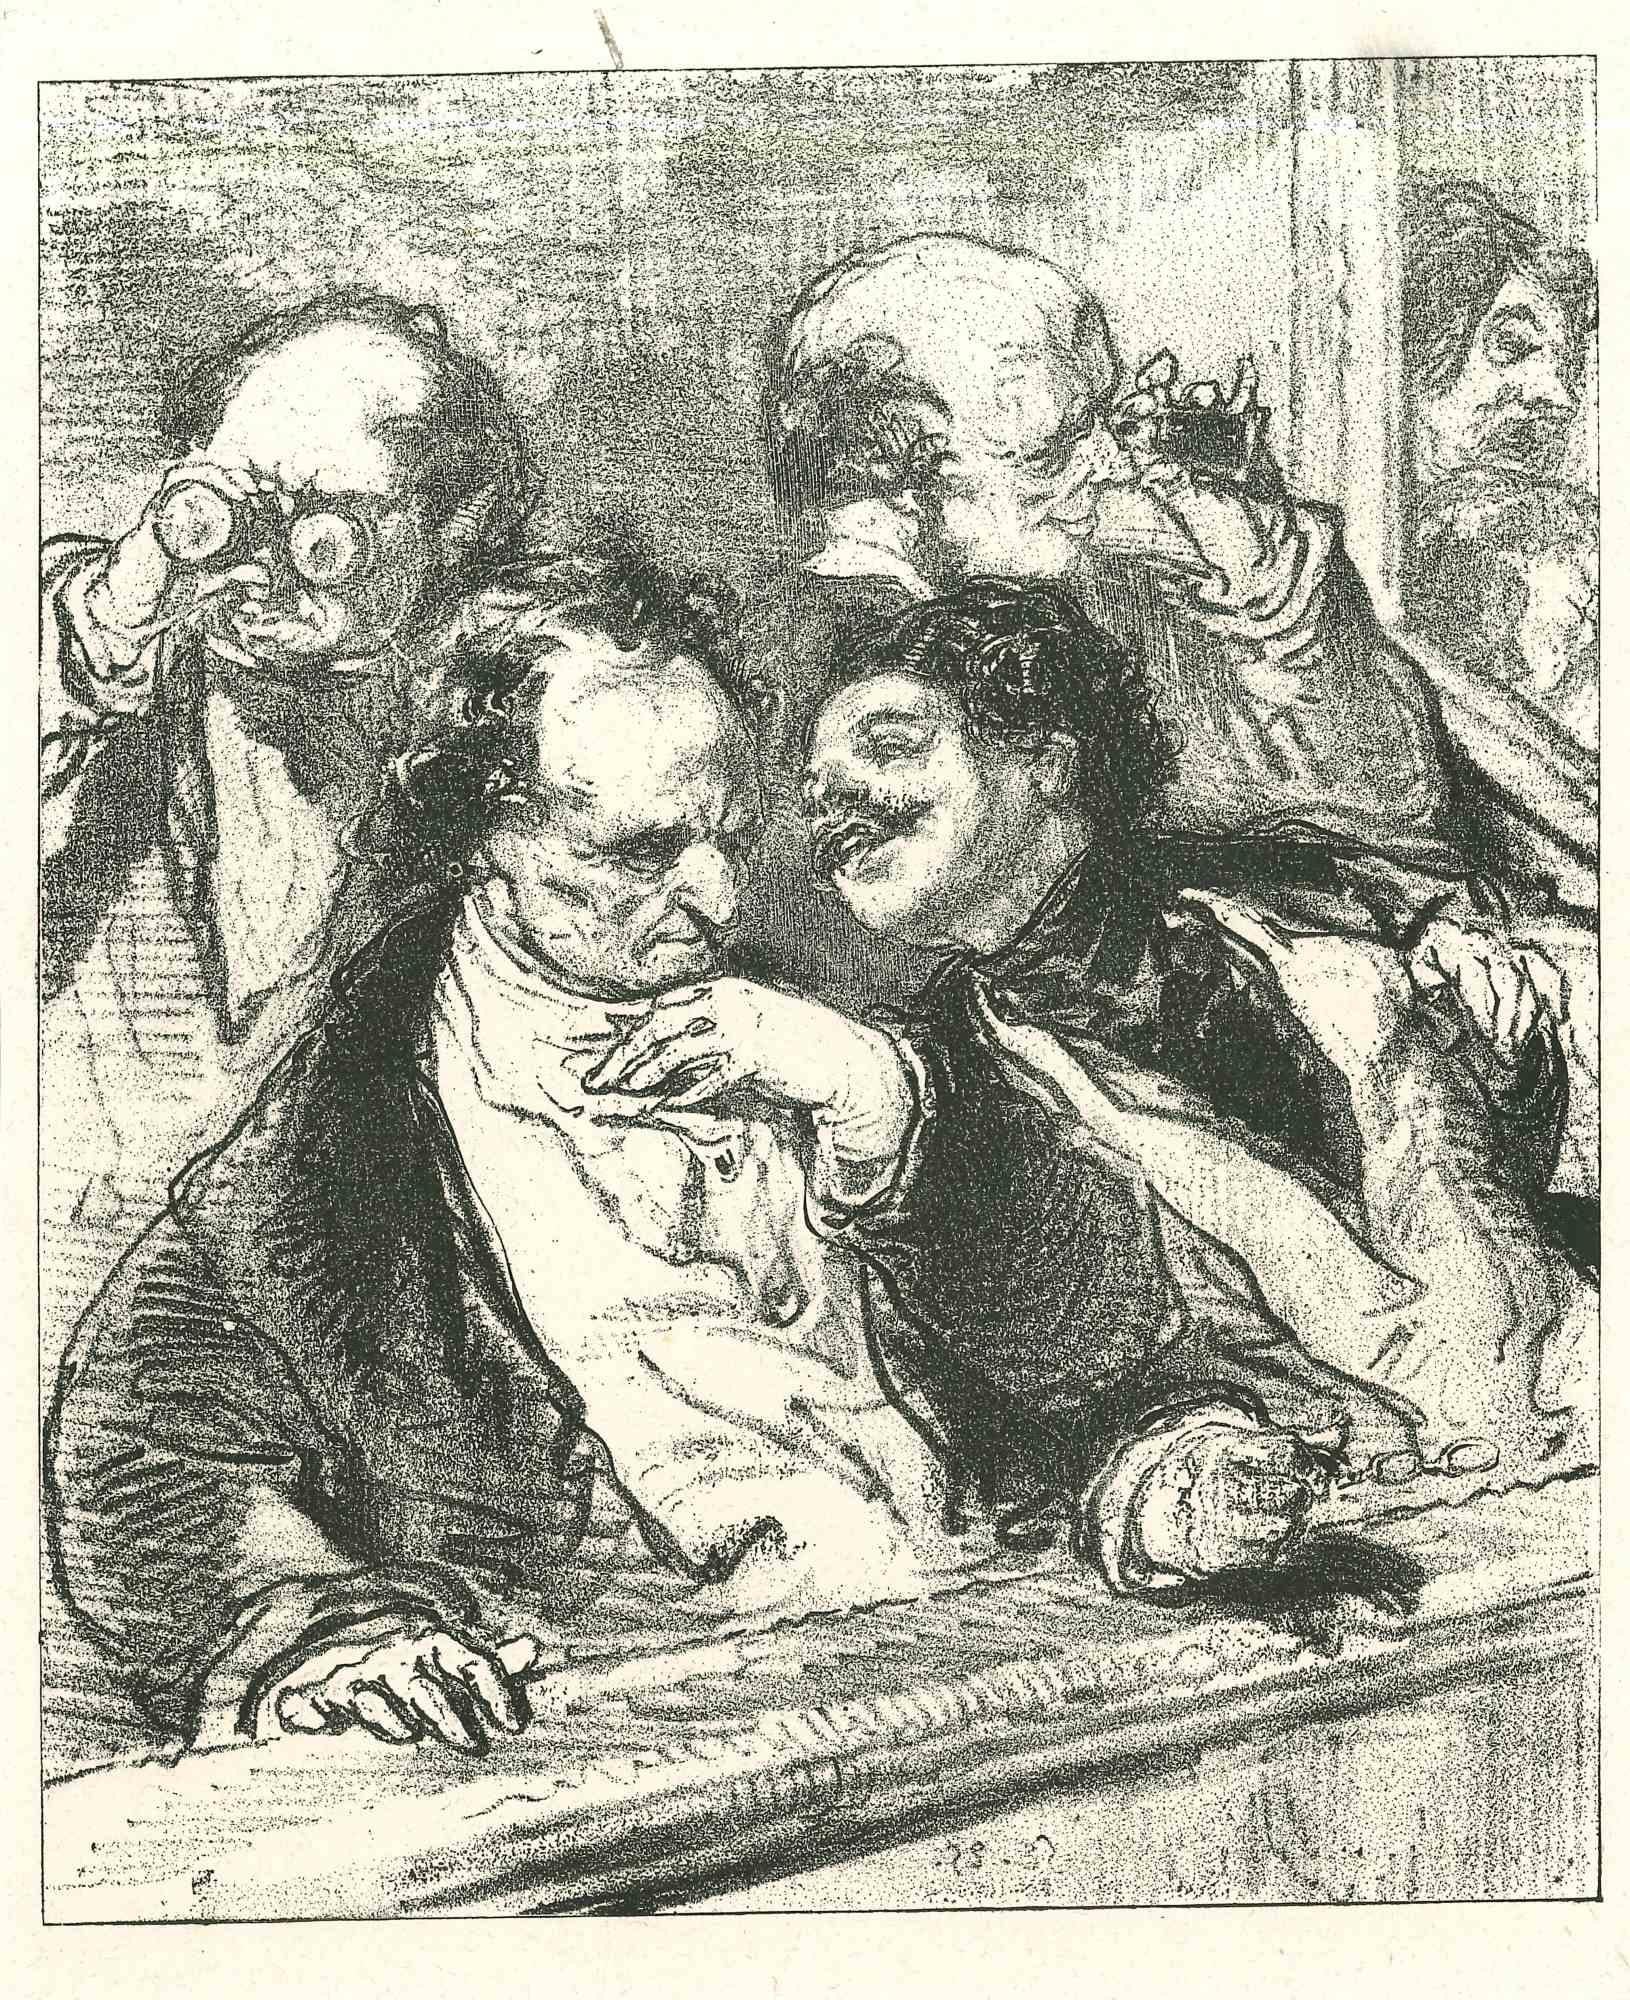 The conversation is an original lithograph on ivory-colored paper, realized by the French draftsman Paul Gavarni (after) (alias Guillaume Sulpice Chevalier Gavarni, 1804-1866) in Paris, 1881, in the collection of Illustrations for "La Mascarade